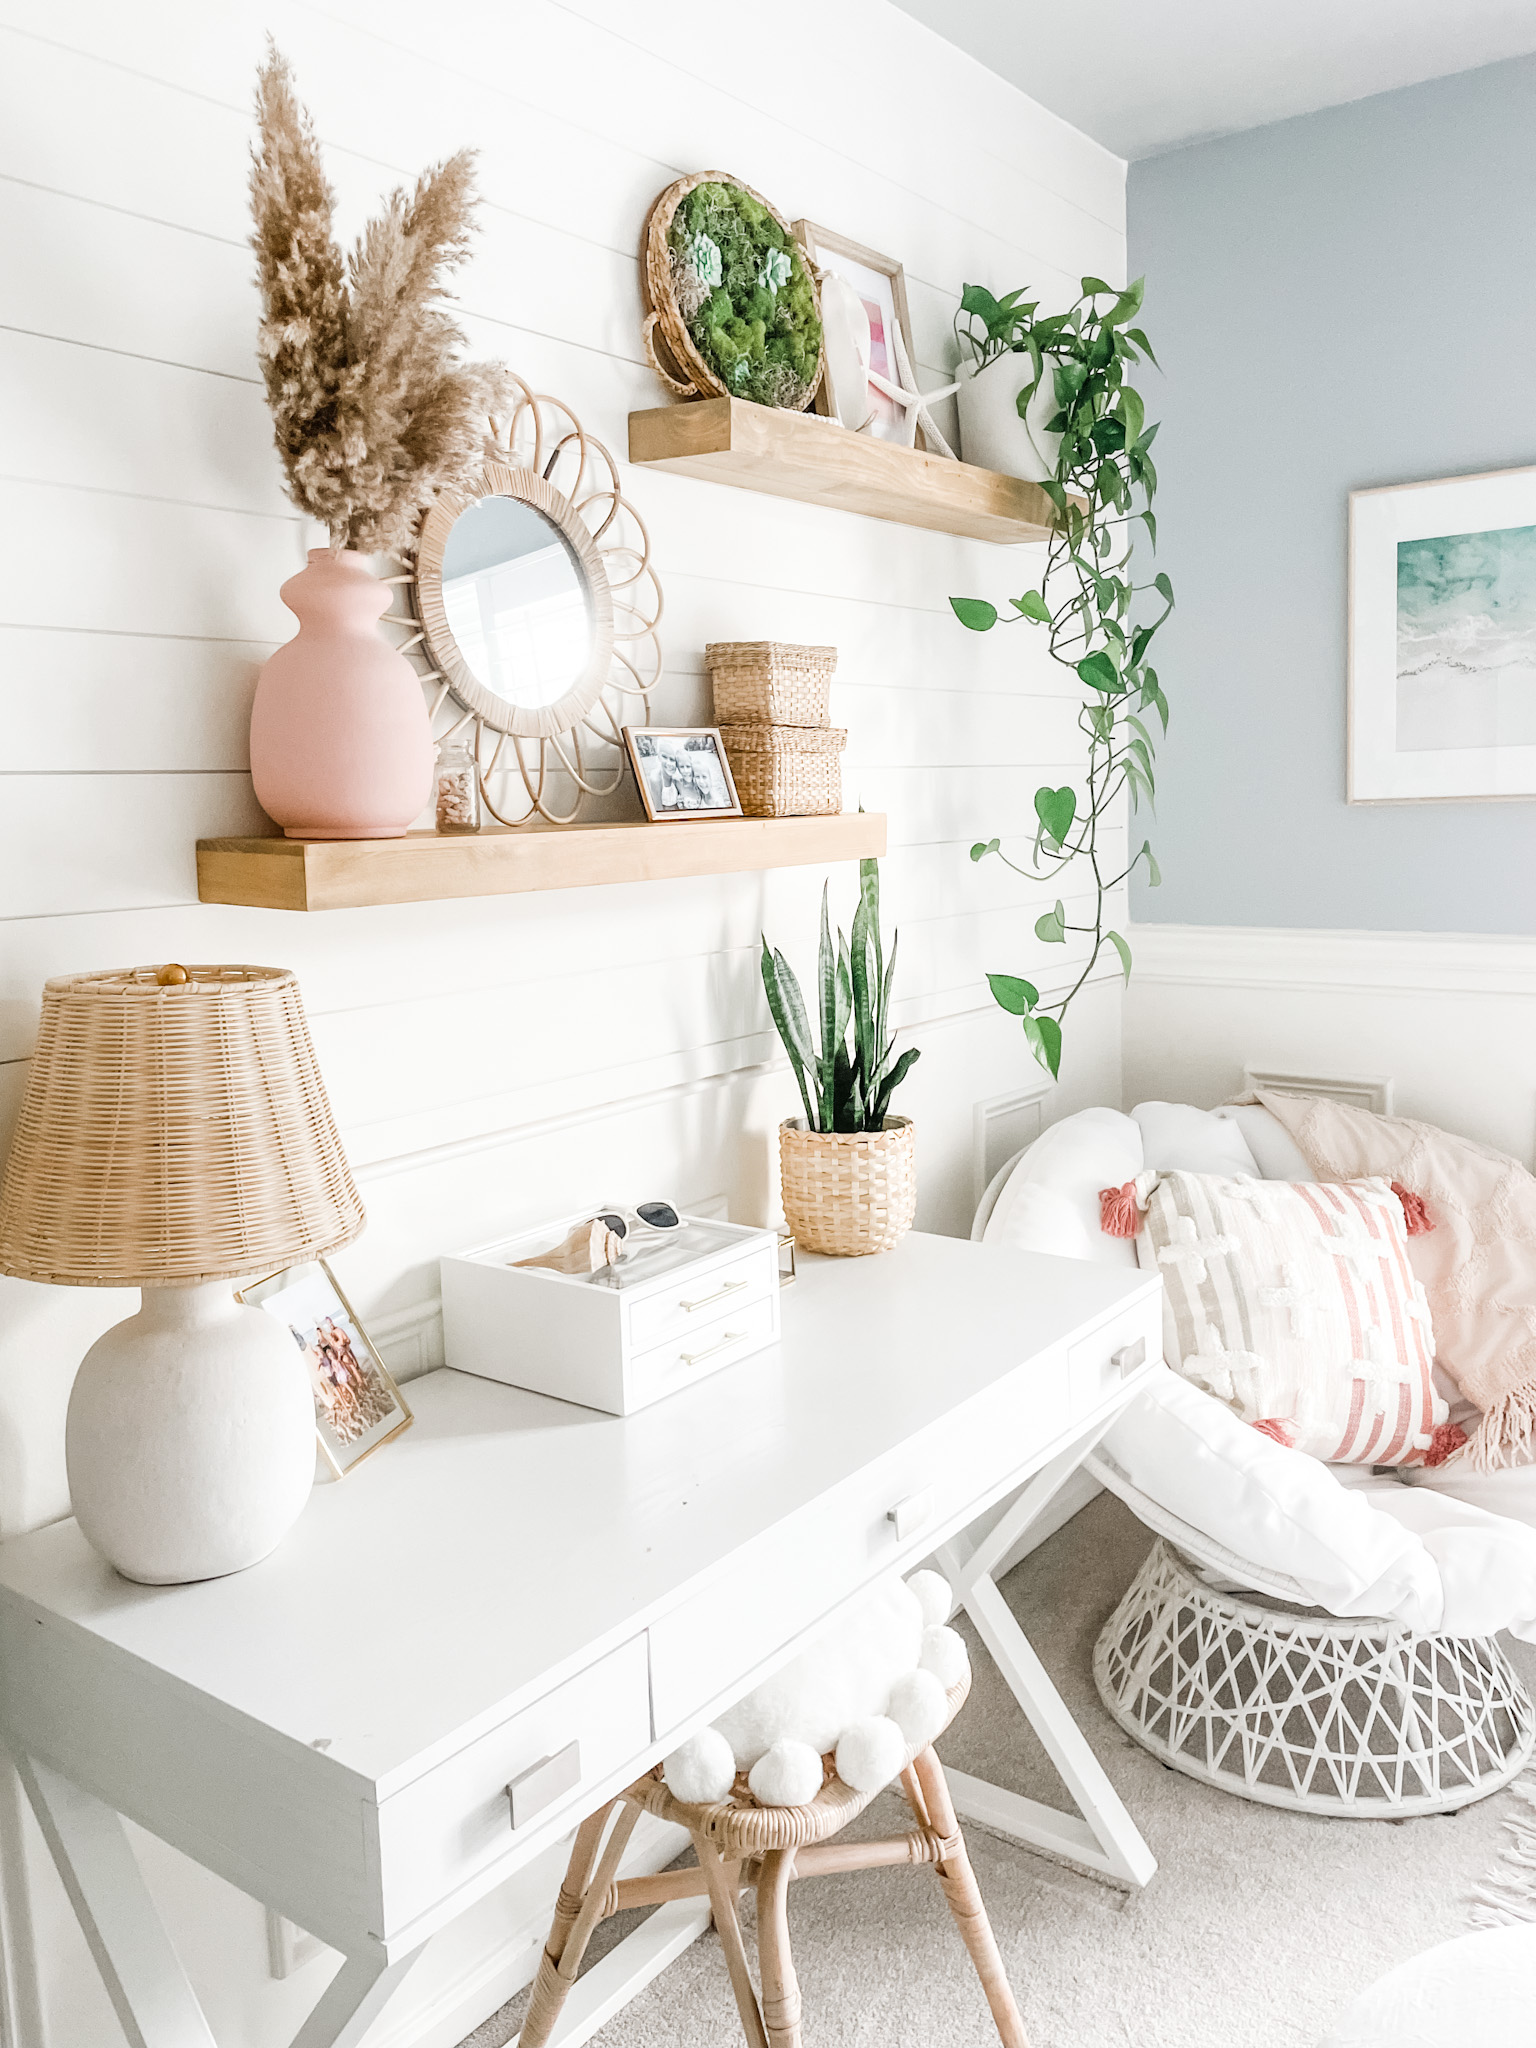 How To Decorate A Coastal Themed - Beachy Bedroom - Home with Heather